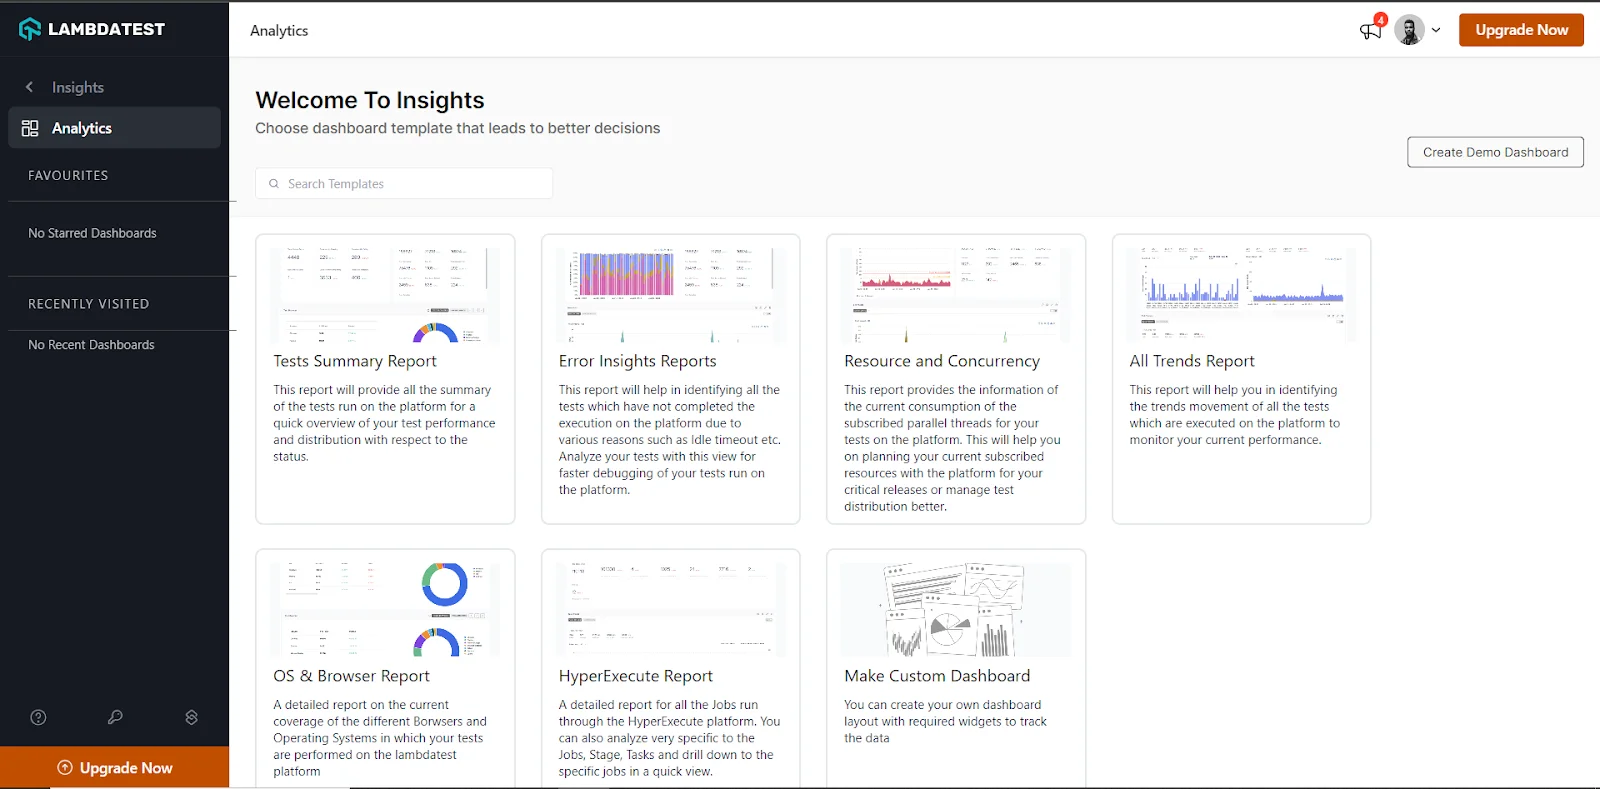 report on the Analytics Dashboard, which displays all the details